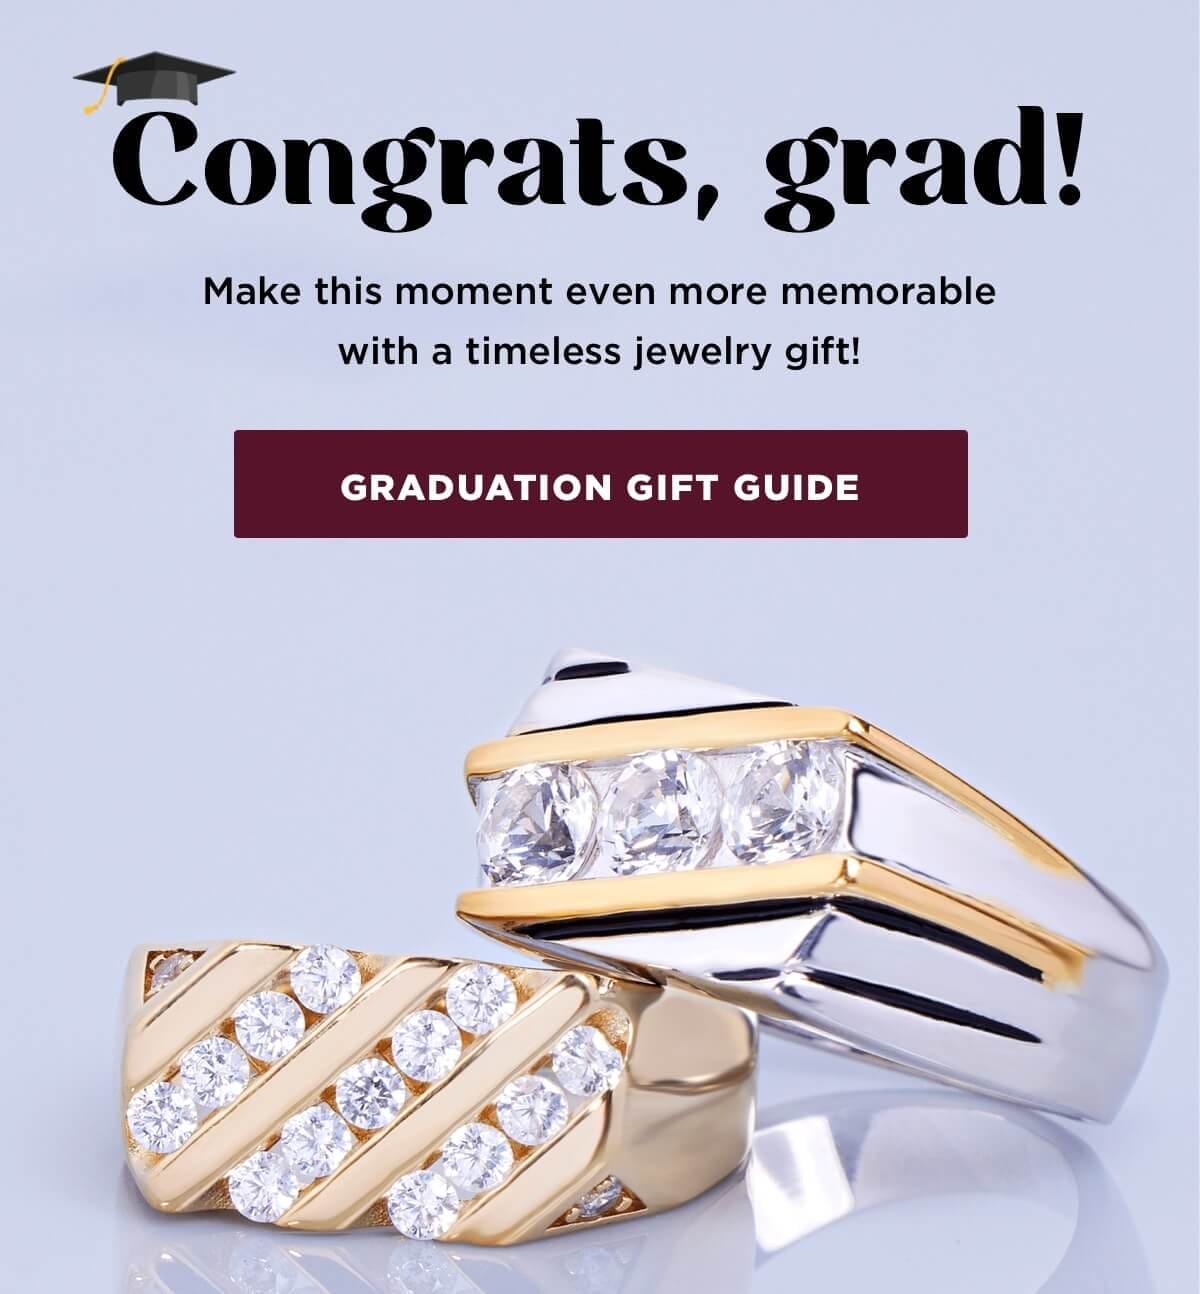 Shop the graduation gift guide